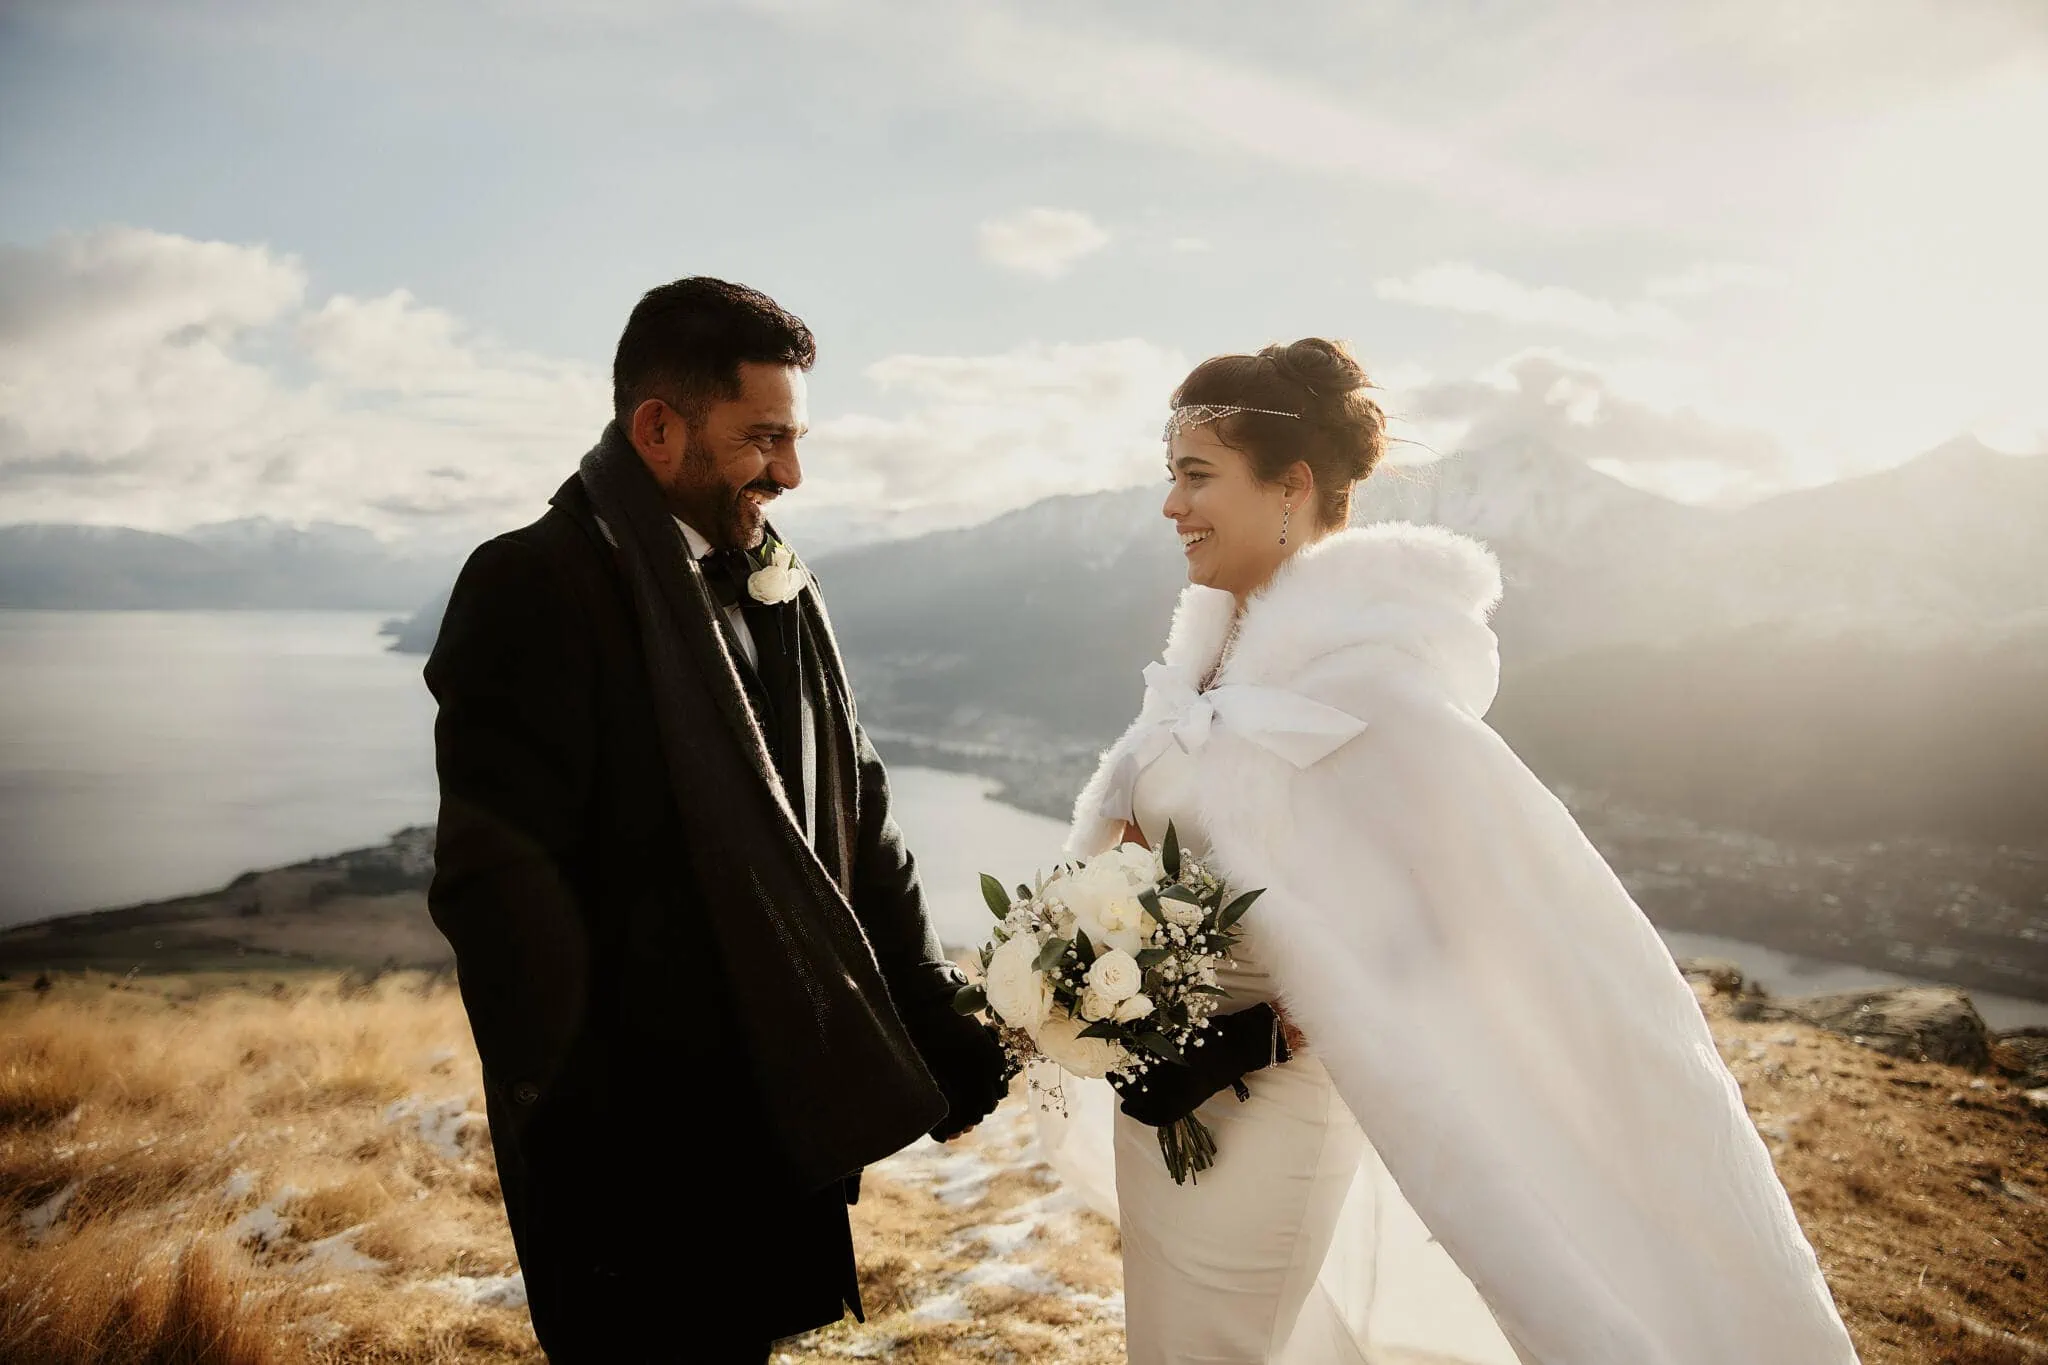 Queenstown New Zealand Elopement Wedding Photographer - Keywords used: Queenstown, Islamic wedding.

Description: Wasim and Yumn, an Islamic couple, exchange vows on top of a mountain in Queenstown with Lake Wanaka as the breathtaking backdrop.